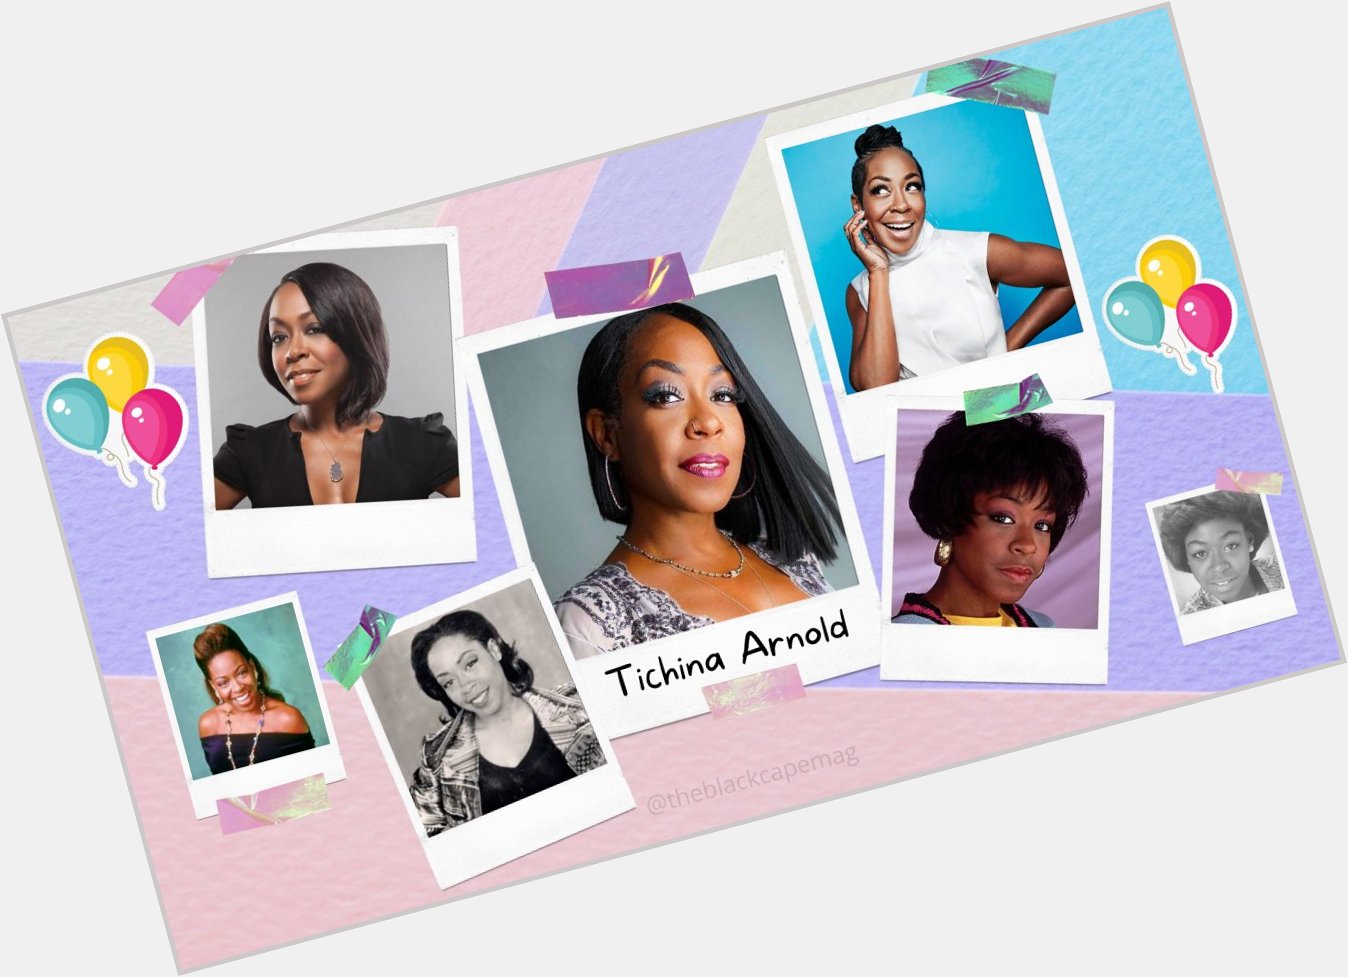 We can\t let the day go by without wishing Tichina Arnold a happy birthday!! 